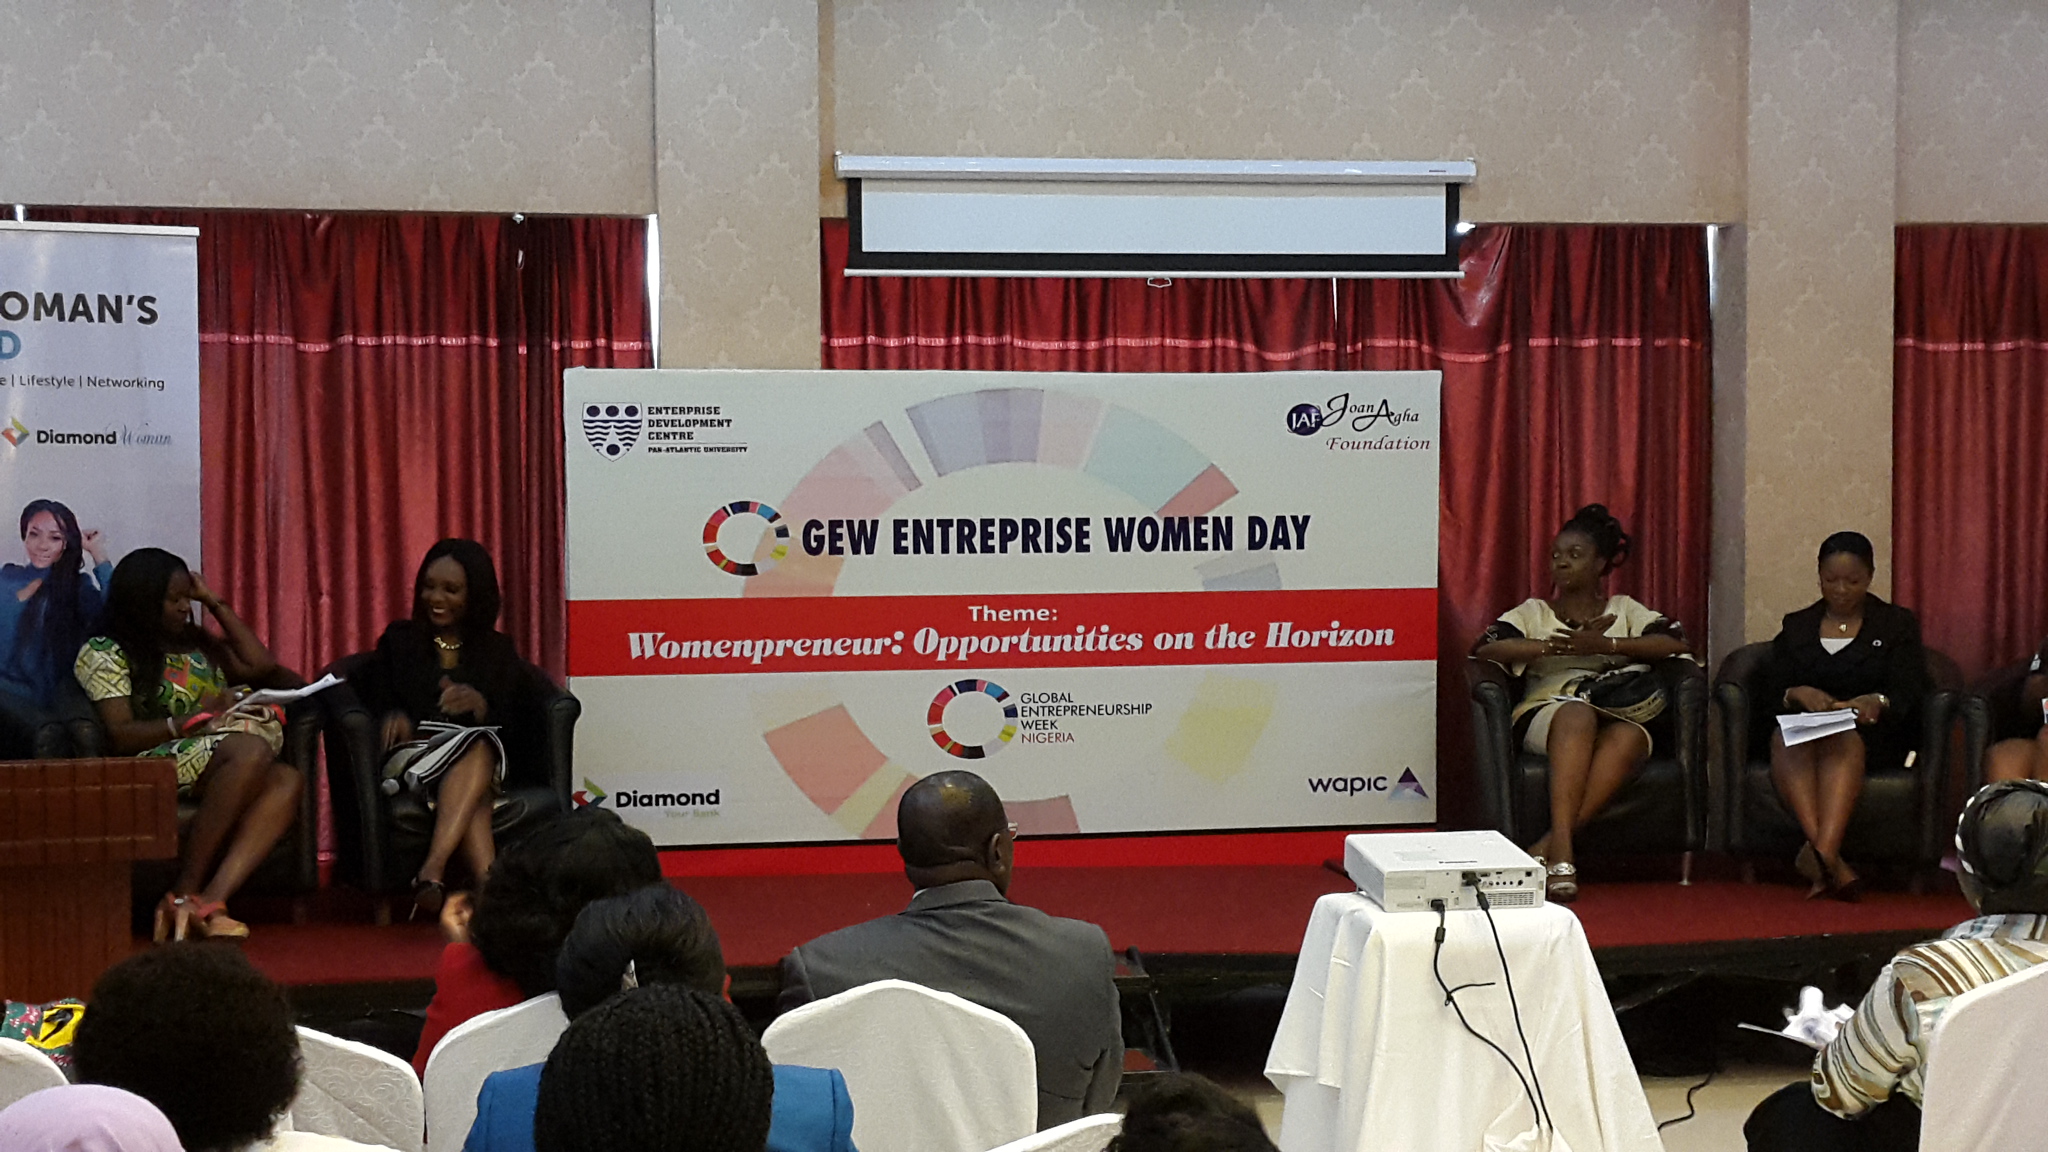 “Bras, Business and Bottom-line” – What went down at the global Women’s Entrepreneurship Day Event in Nigeria